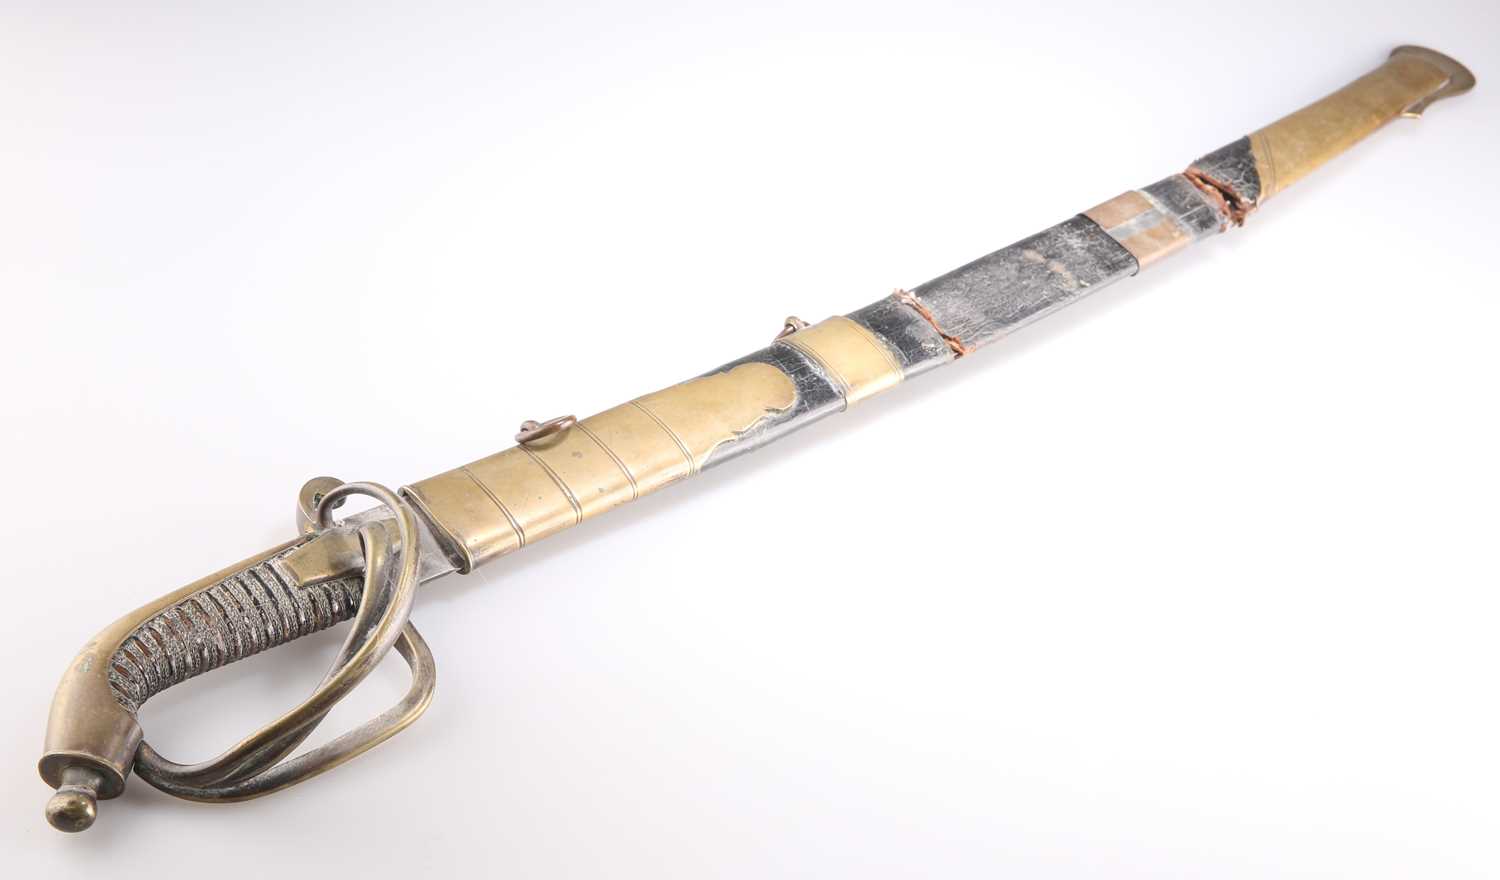 A RUSSIAN NAVAL SWORD, 1855 PATTERN, LATE 19TH/EARLY 20TH CENTURY - Image 2 of 8